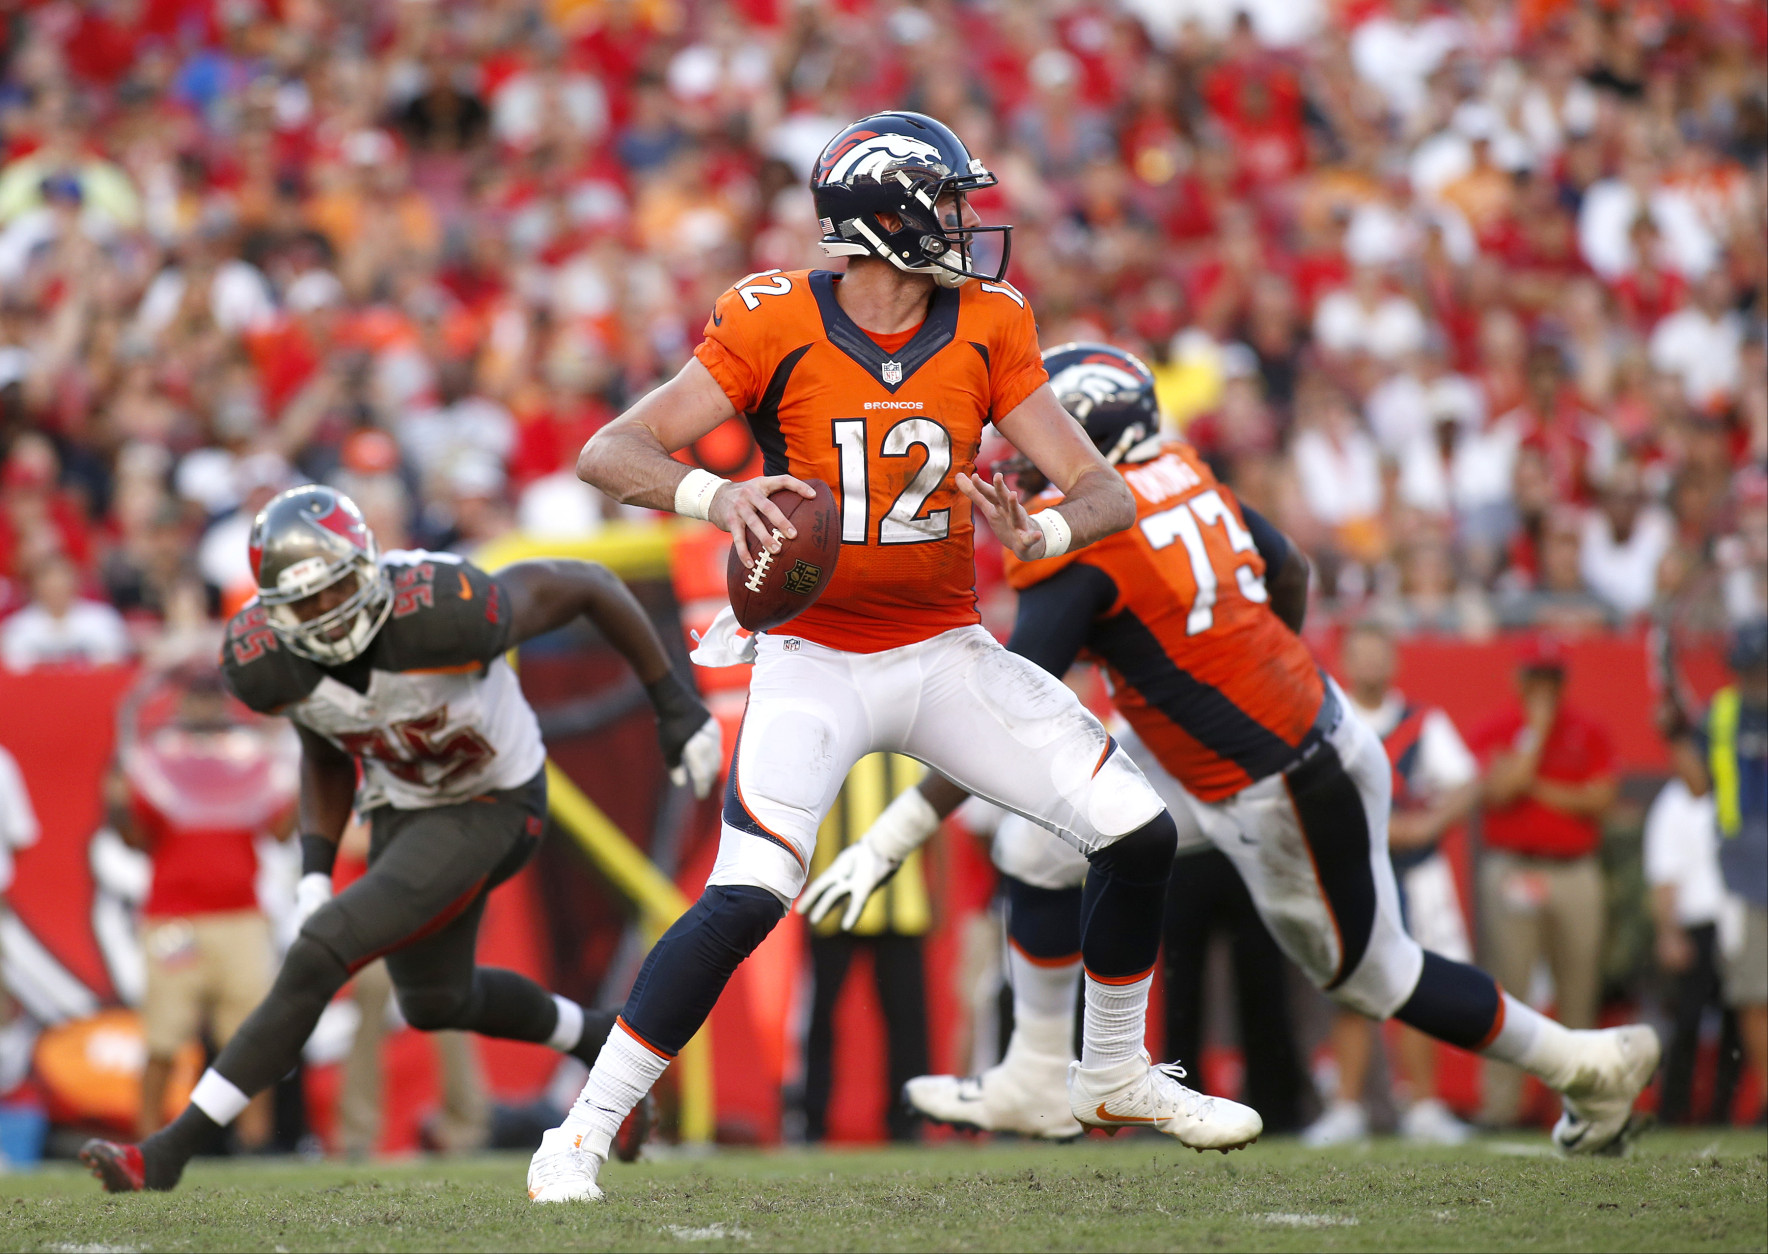 TAMPA, FL - OCTOBER 2:  Quarterback Paxton Lynch #12 of the Denver Broncos looks for an open receiver during the third quarter of an NFL game against the Tampa Bay Buccaneers on October 2, 2016 at Raymond James Stadium in Tampa, Florida. (Photo by Brian Blanco/Getty Images)